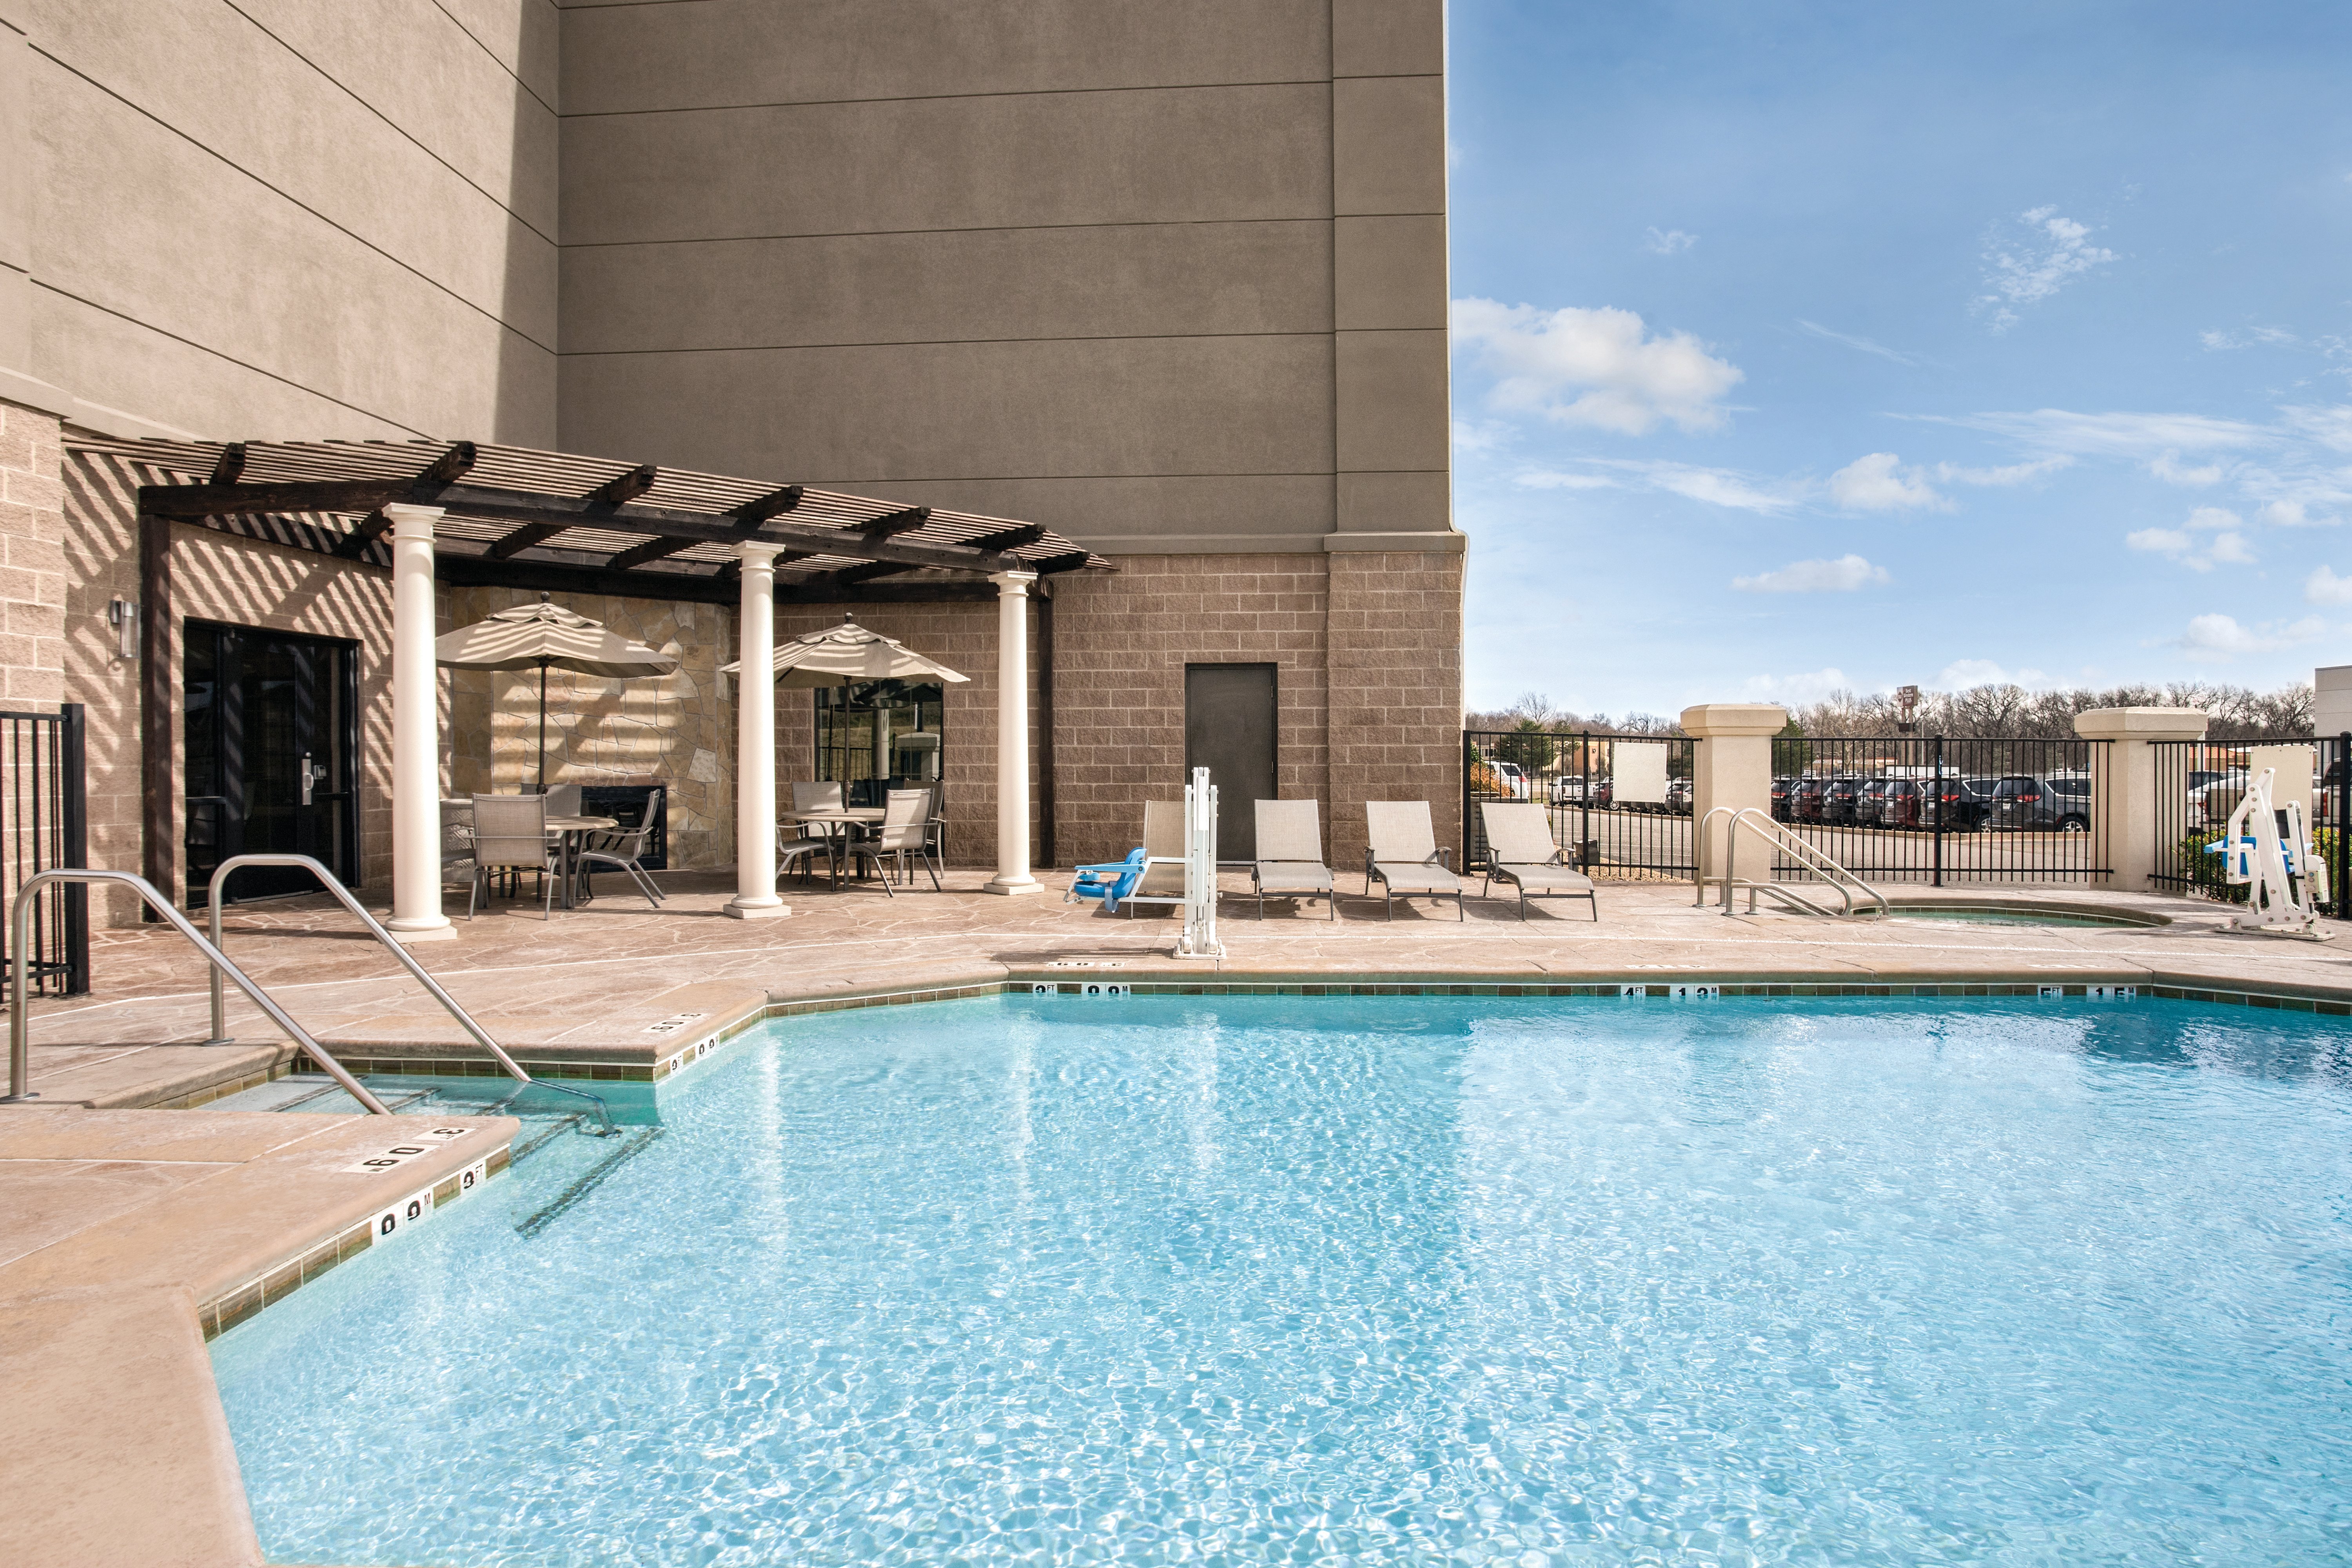 Have a morning or afternoon dip in our outdoor swimming pool